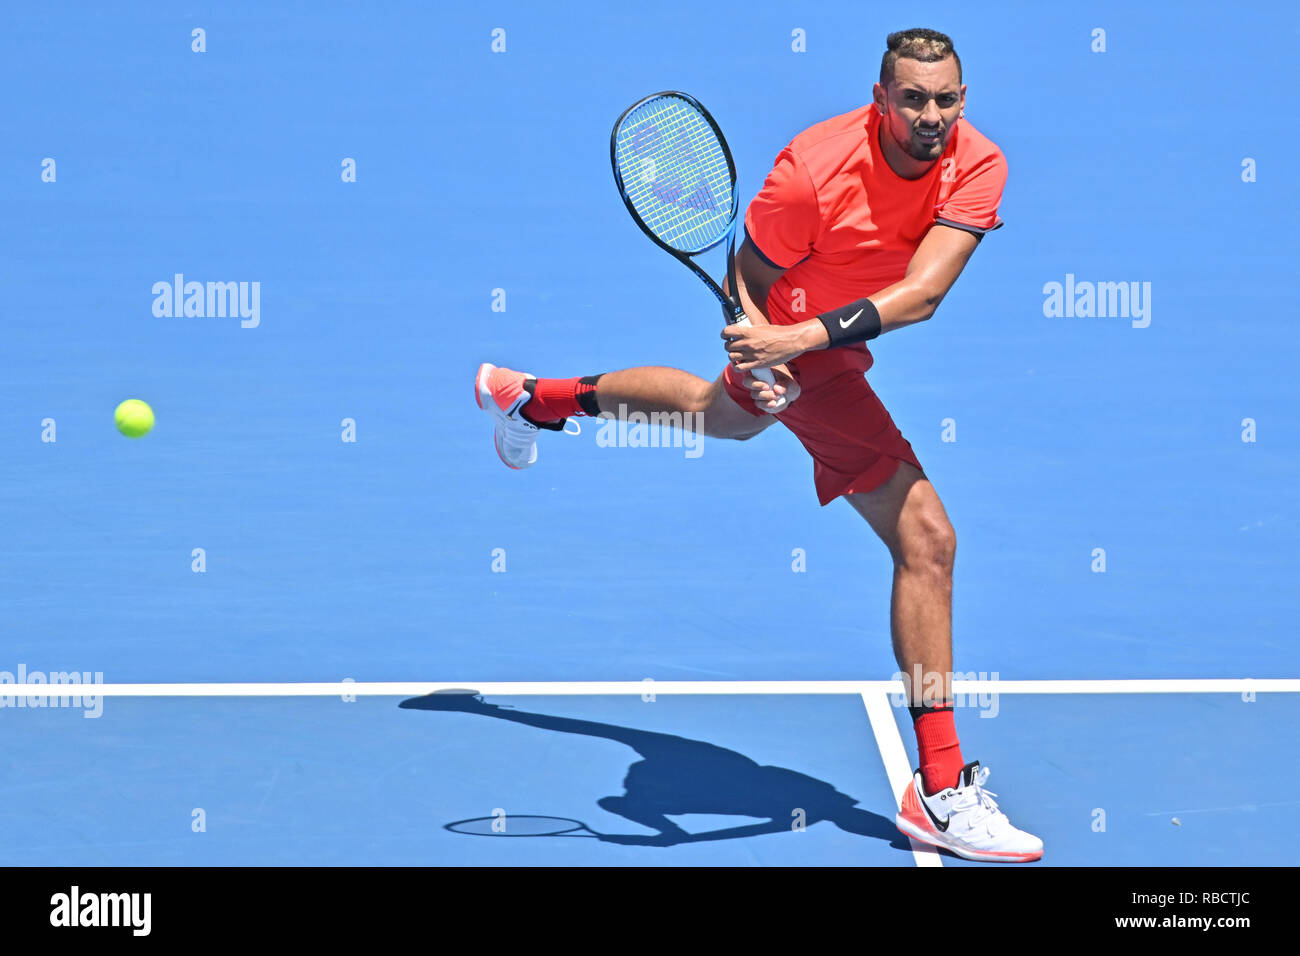 Melbourne, Australia. 9th Jan, 2019. Nick Kyrgios (AUS) in action against  Bernard Tomic (AUS) at the Kooyong Classic tennis tournament in Melbourne,  Australia. Tomic won 63 64. Sydney Low/Cal Sport Media/Alamy Live